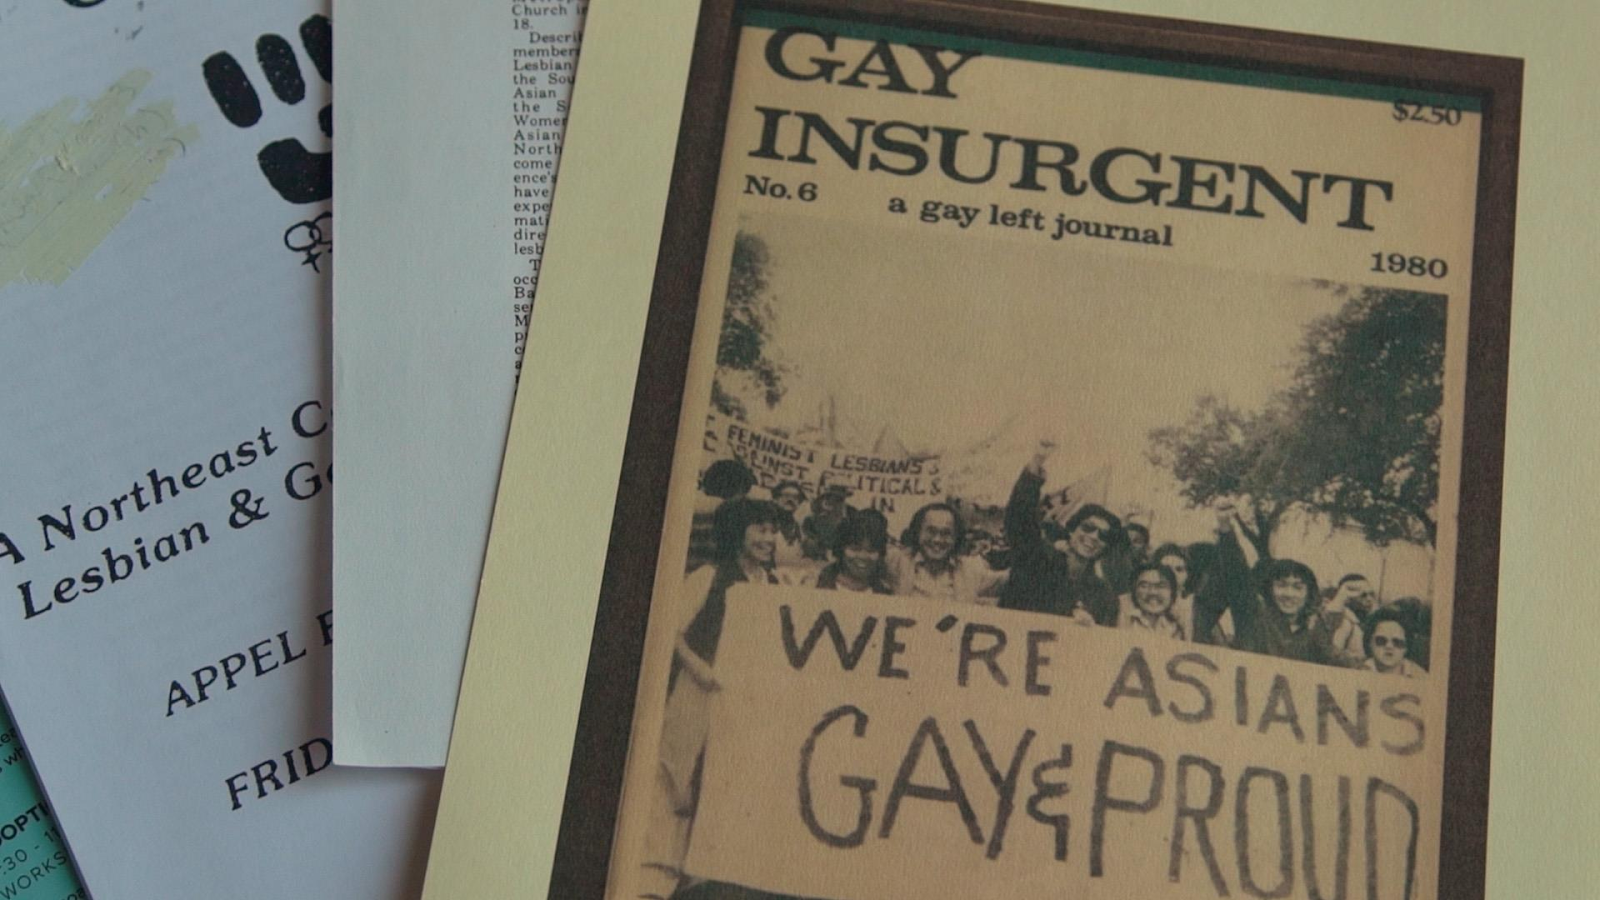 A stack of historical LGBTQ pamphlets and newsletters. On top is a copy of the gay left journal Insurgent with a photo of people marching with a banner that reads "We're Asians gay and proud" on the cover.